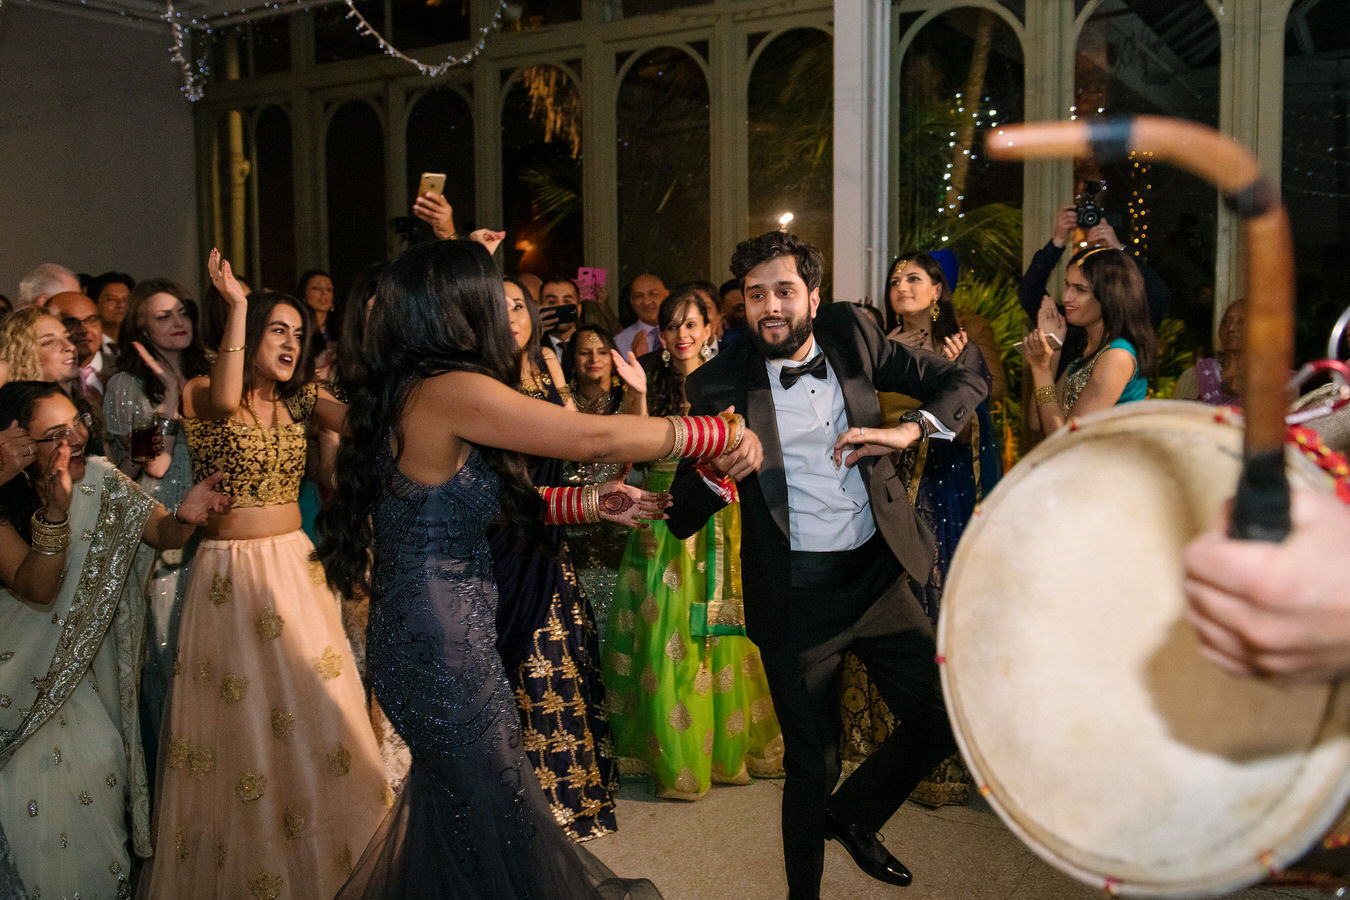 Sikh Asian wedding couple are dancing in the middle of the dancefloor and other guests applaud around. In the foreground there is a Dhol Drum.